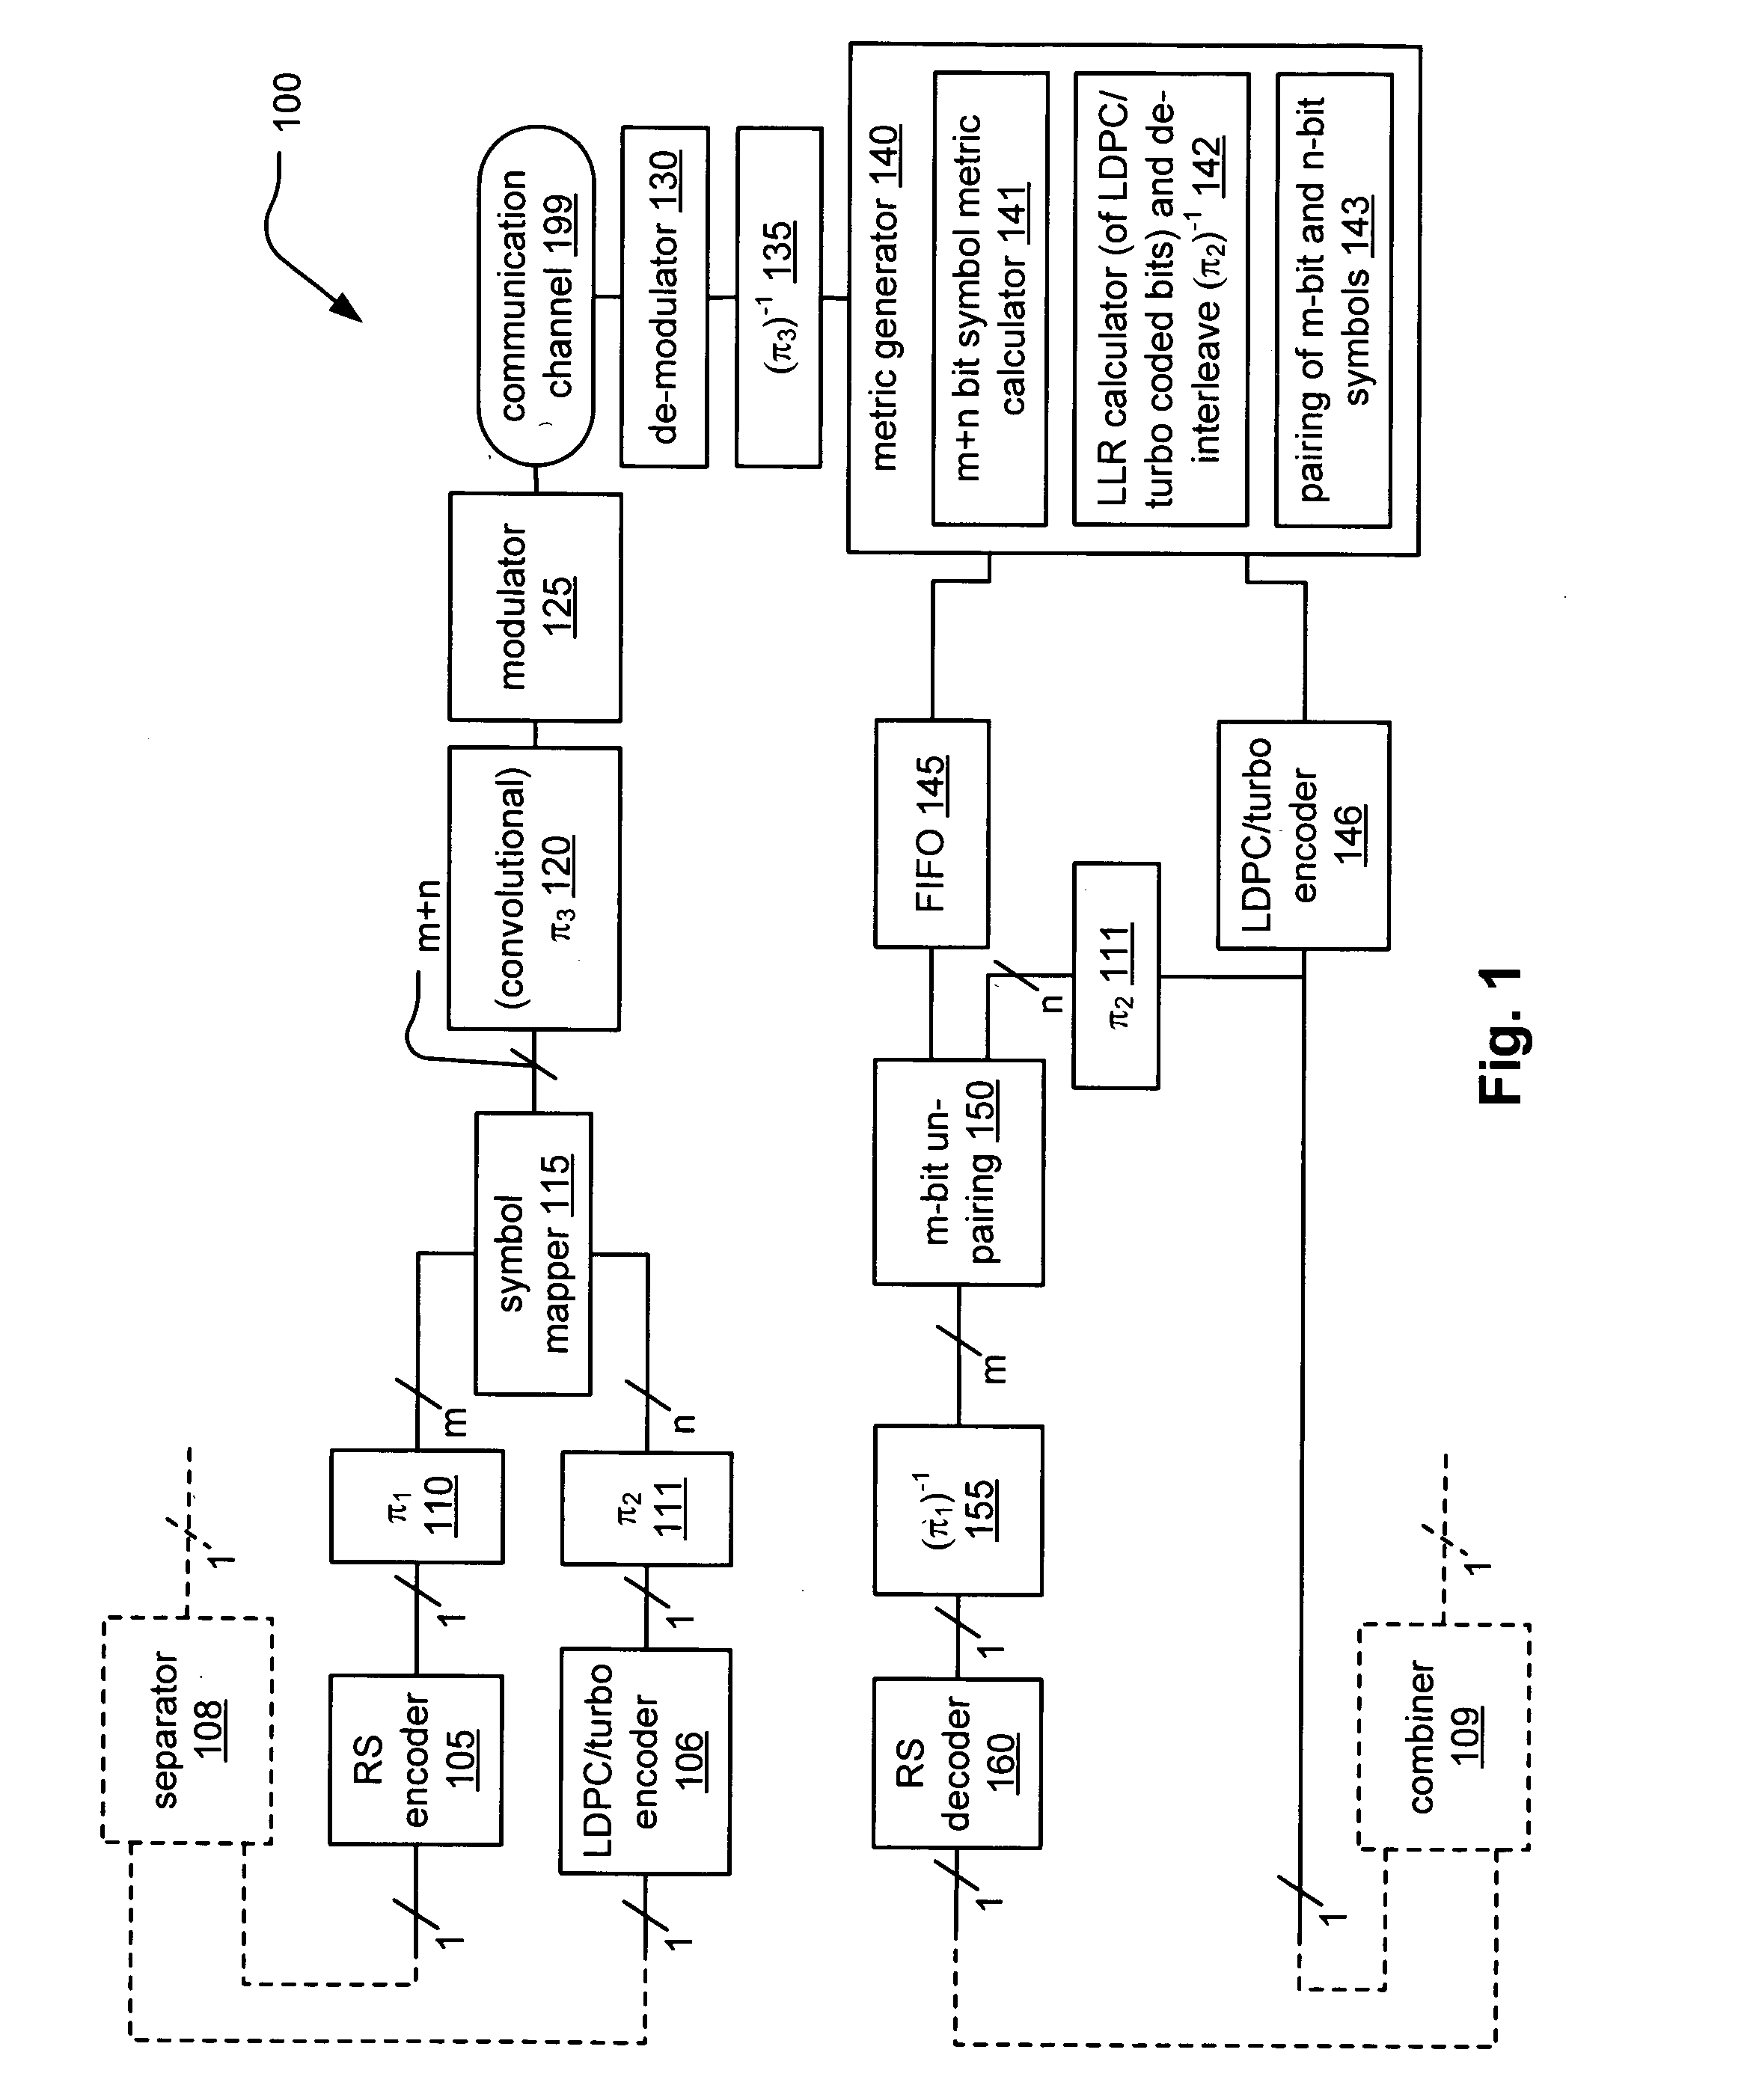 System correcting random and/or burst errors using RS (Reed-Solomon) code, turbo/LDPC (Low Density Parity Check) code and convolutional interleave